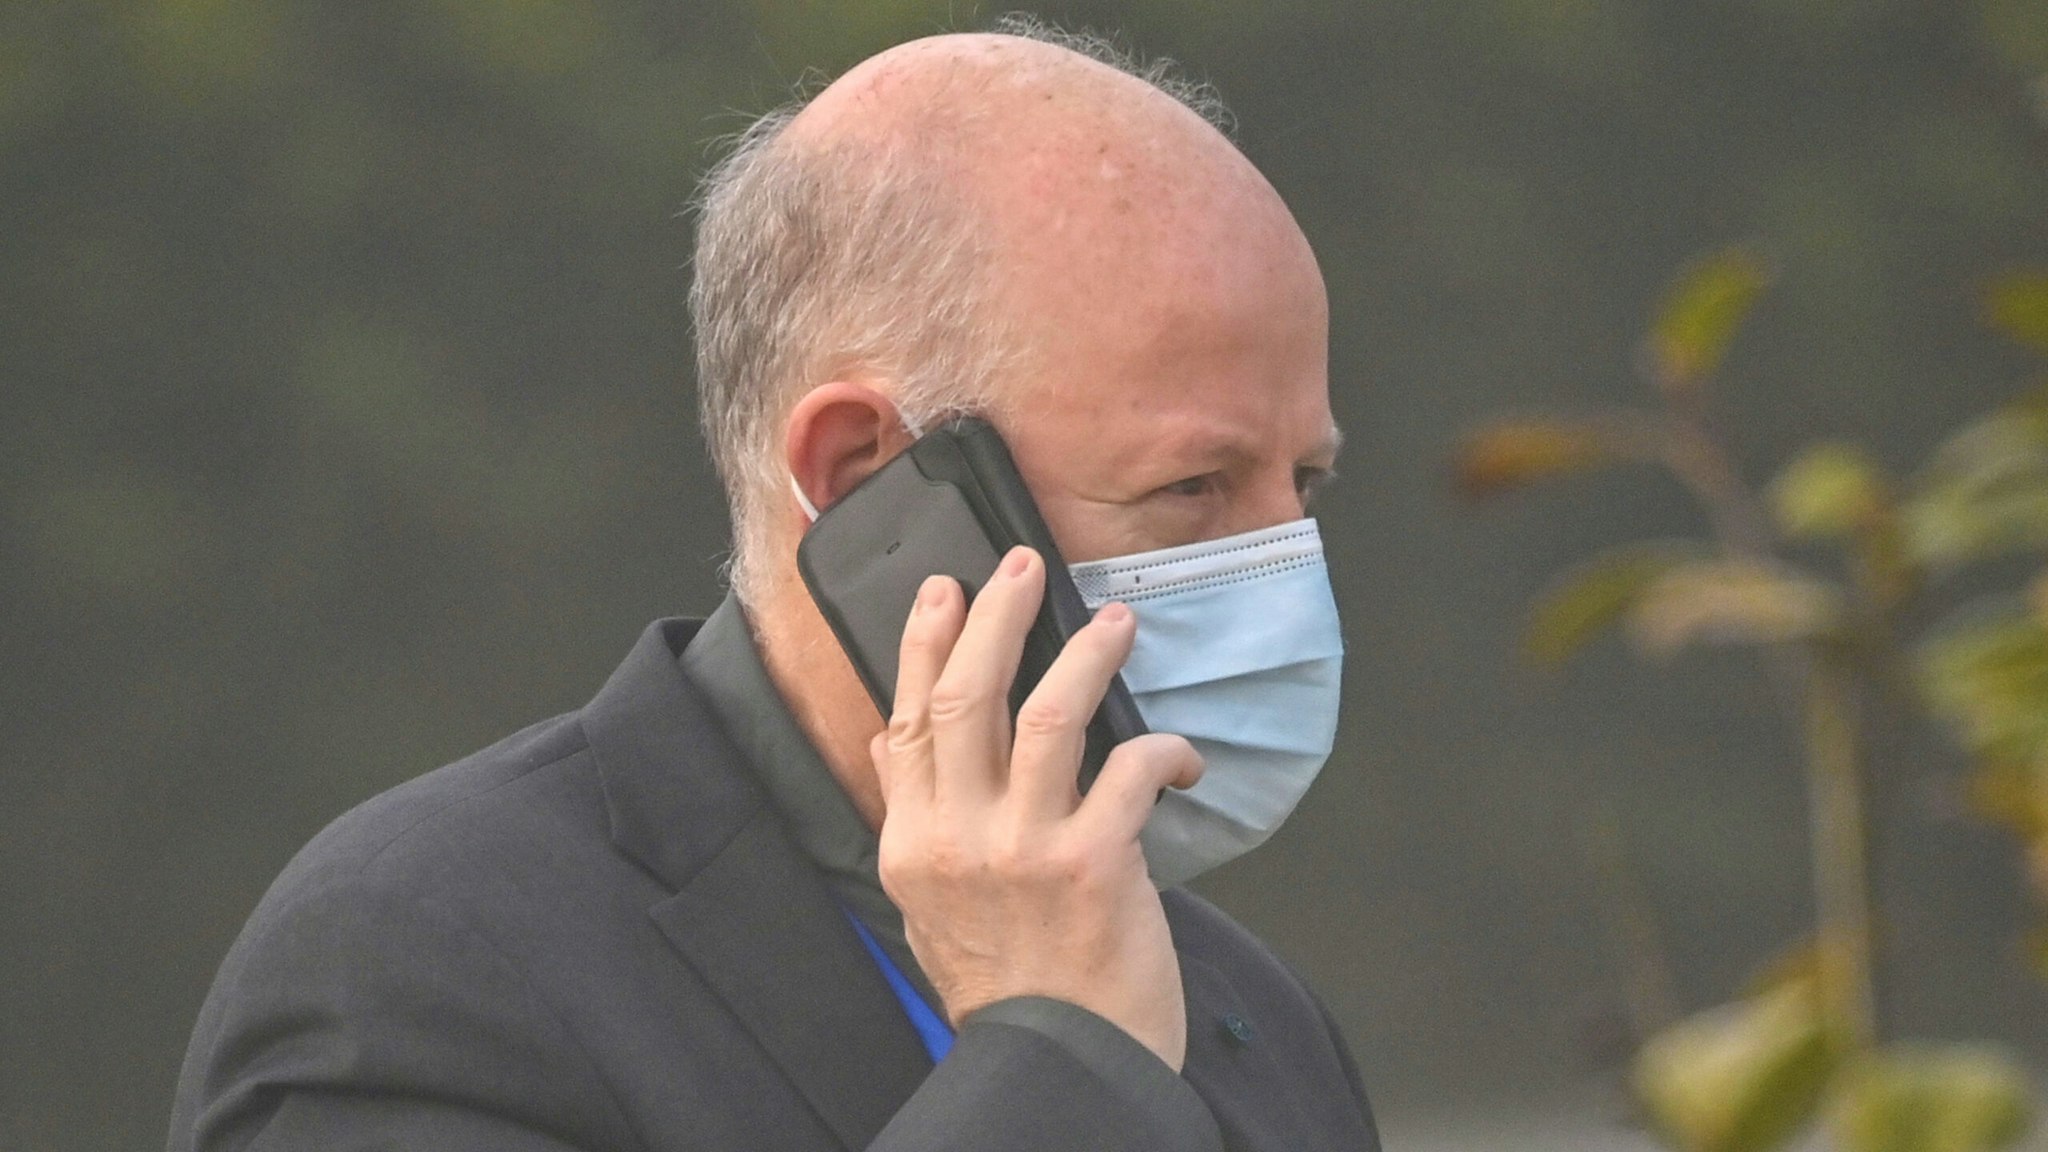 Peter Daszak, a member of the World Health Organization (WHO) team investigating the origins of the COVID-19 coronavirus, talks on his cellphone at the Hilton Wuhan Optics Valley in Wuhan, in China's central Hubei province on February 3, 2021.